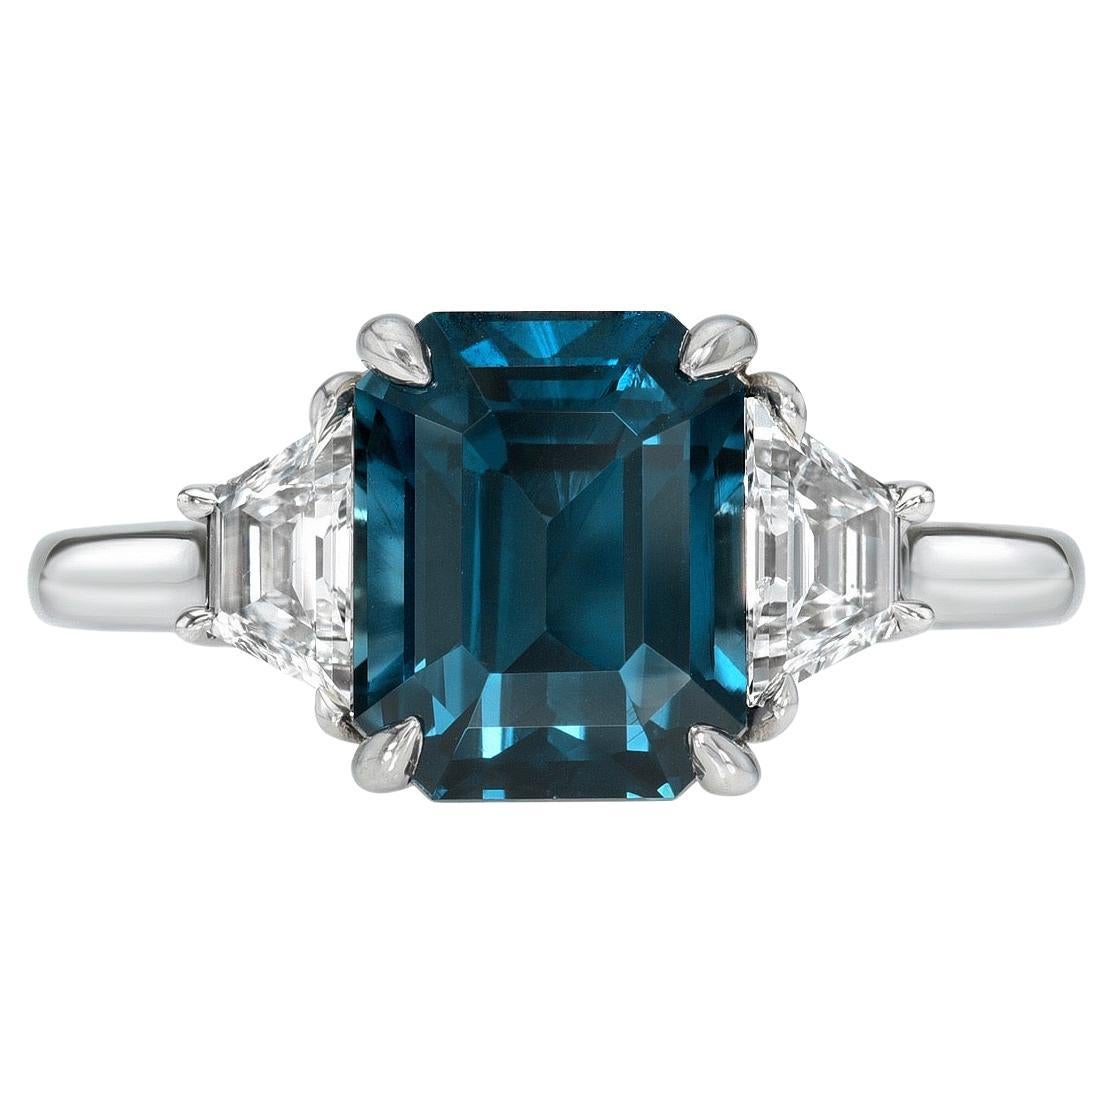 Teal Blue Sapphire Ring 4.16 Carat Emerald Cut Sri Lanka In New Condition For Sale In Beverly Hills, CA